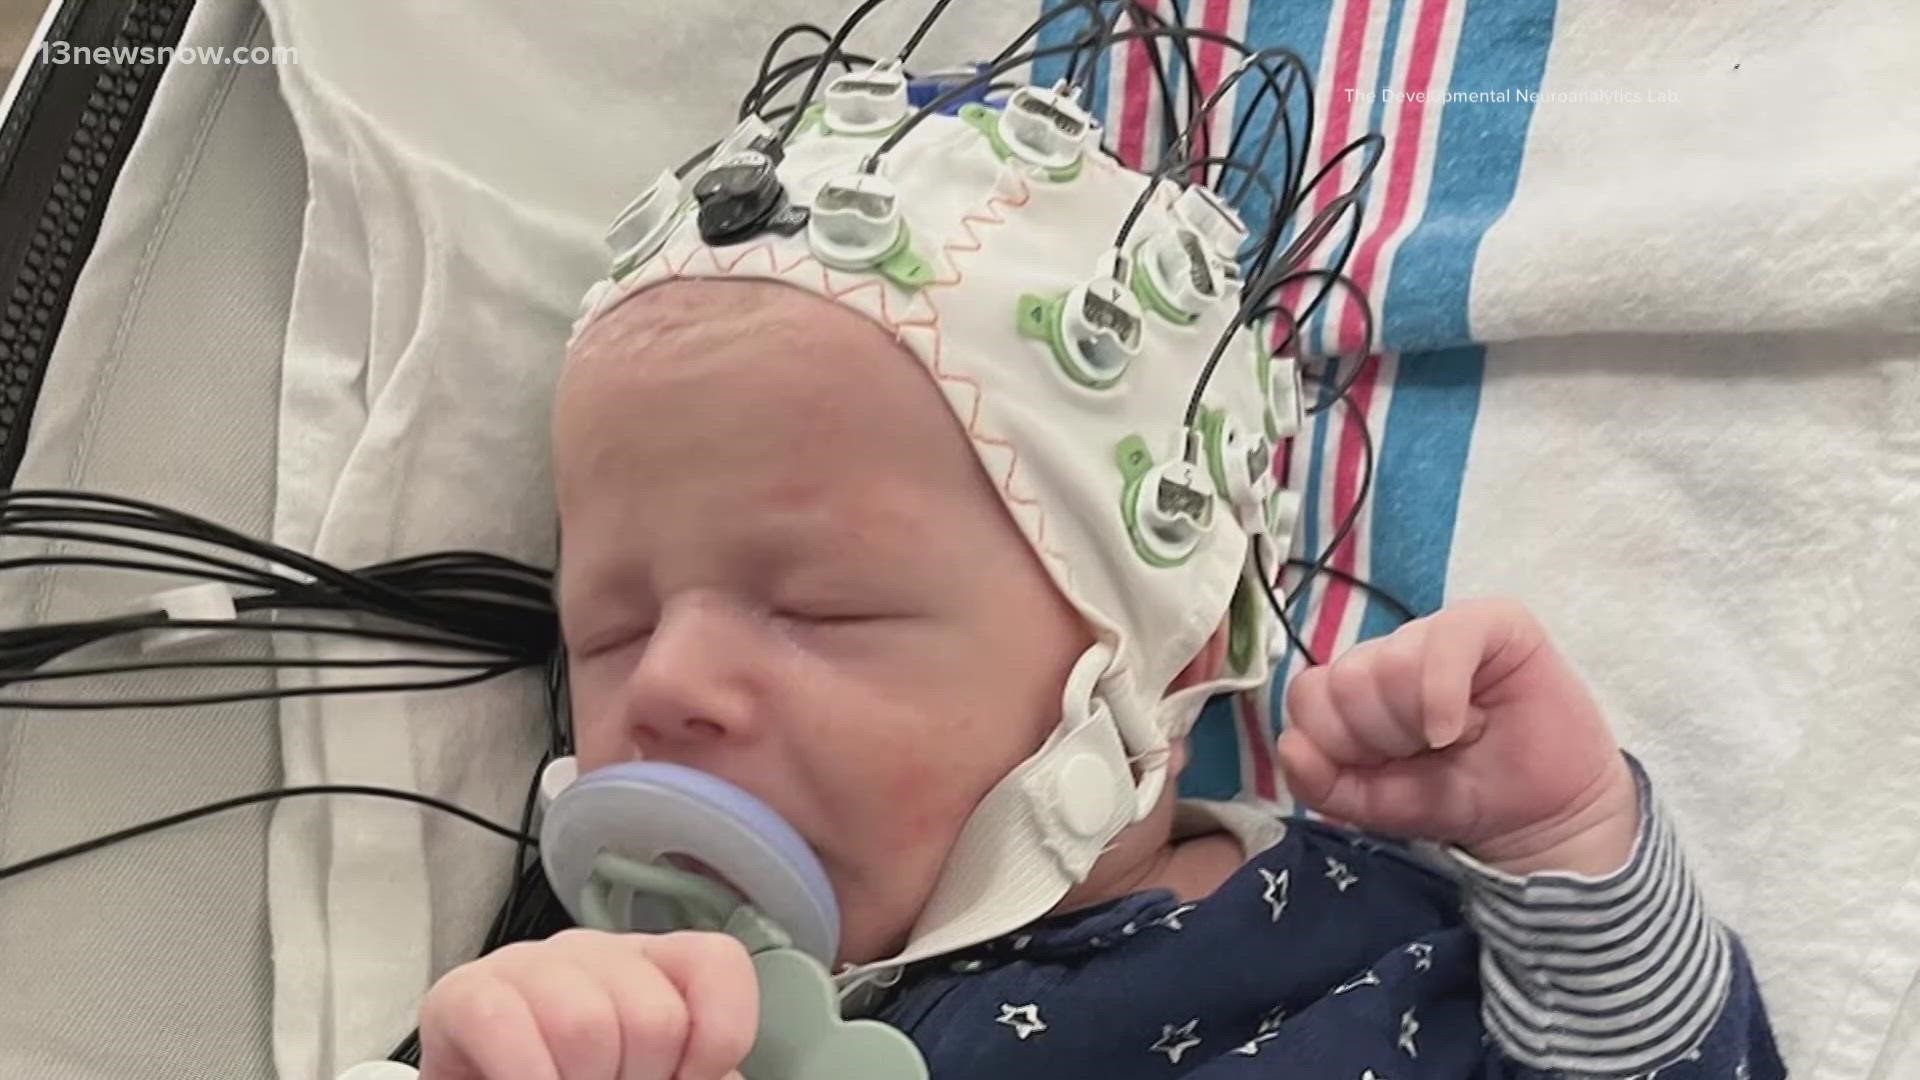 Some children on the autism spectrum aren't diagnosed until age 4 or 5. New research is working to detect autism in newborns before they even leave the hospital.